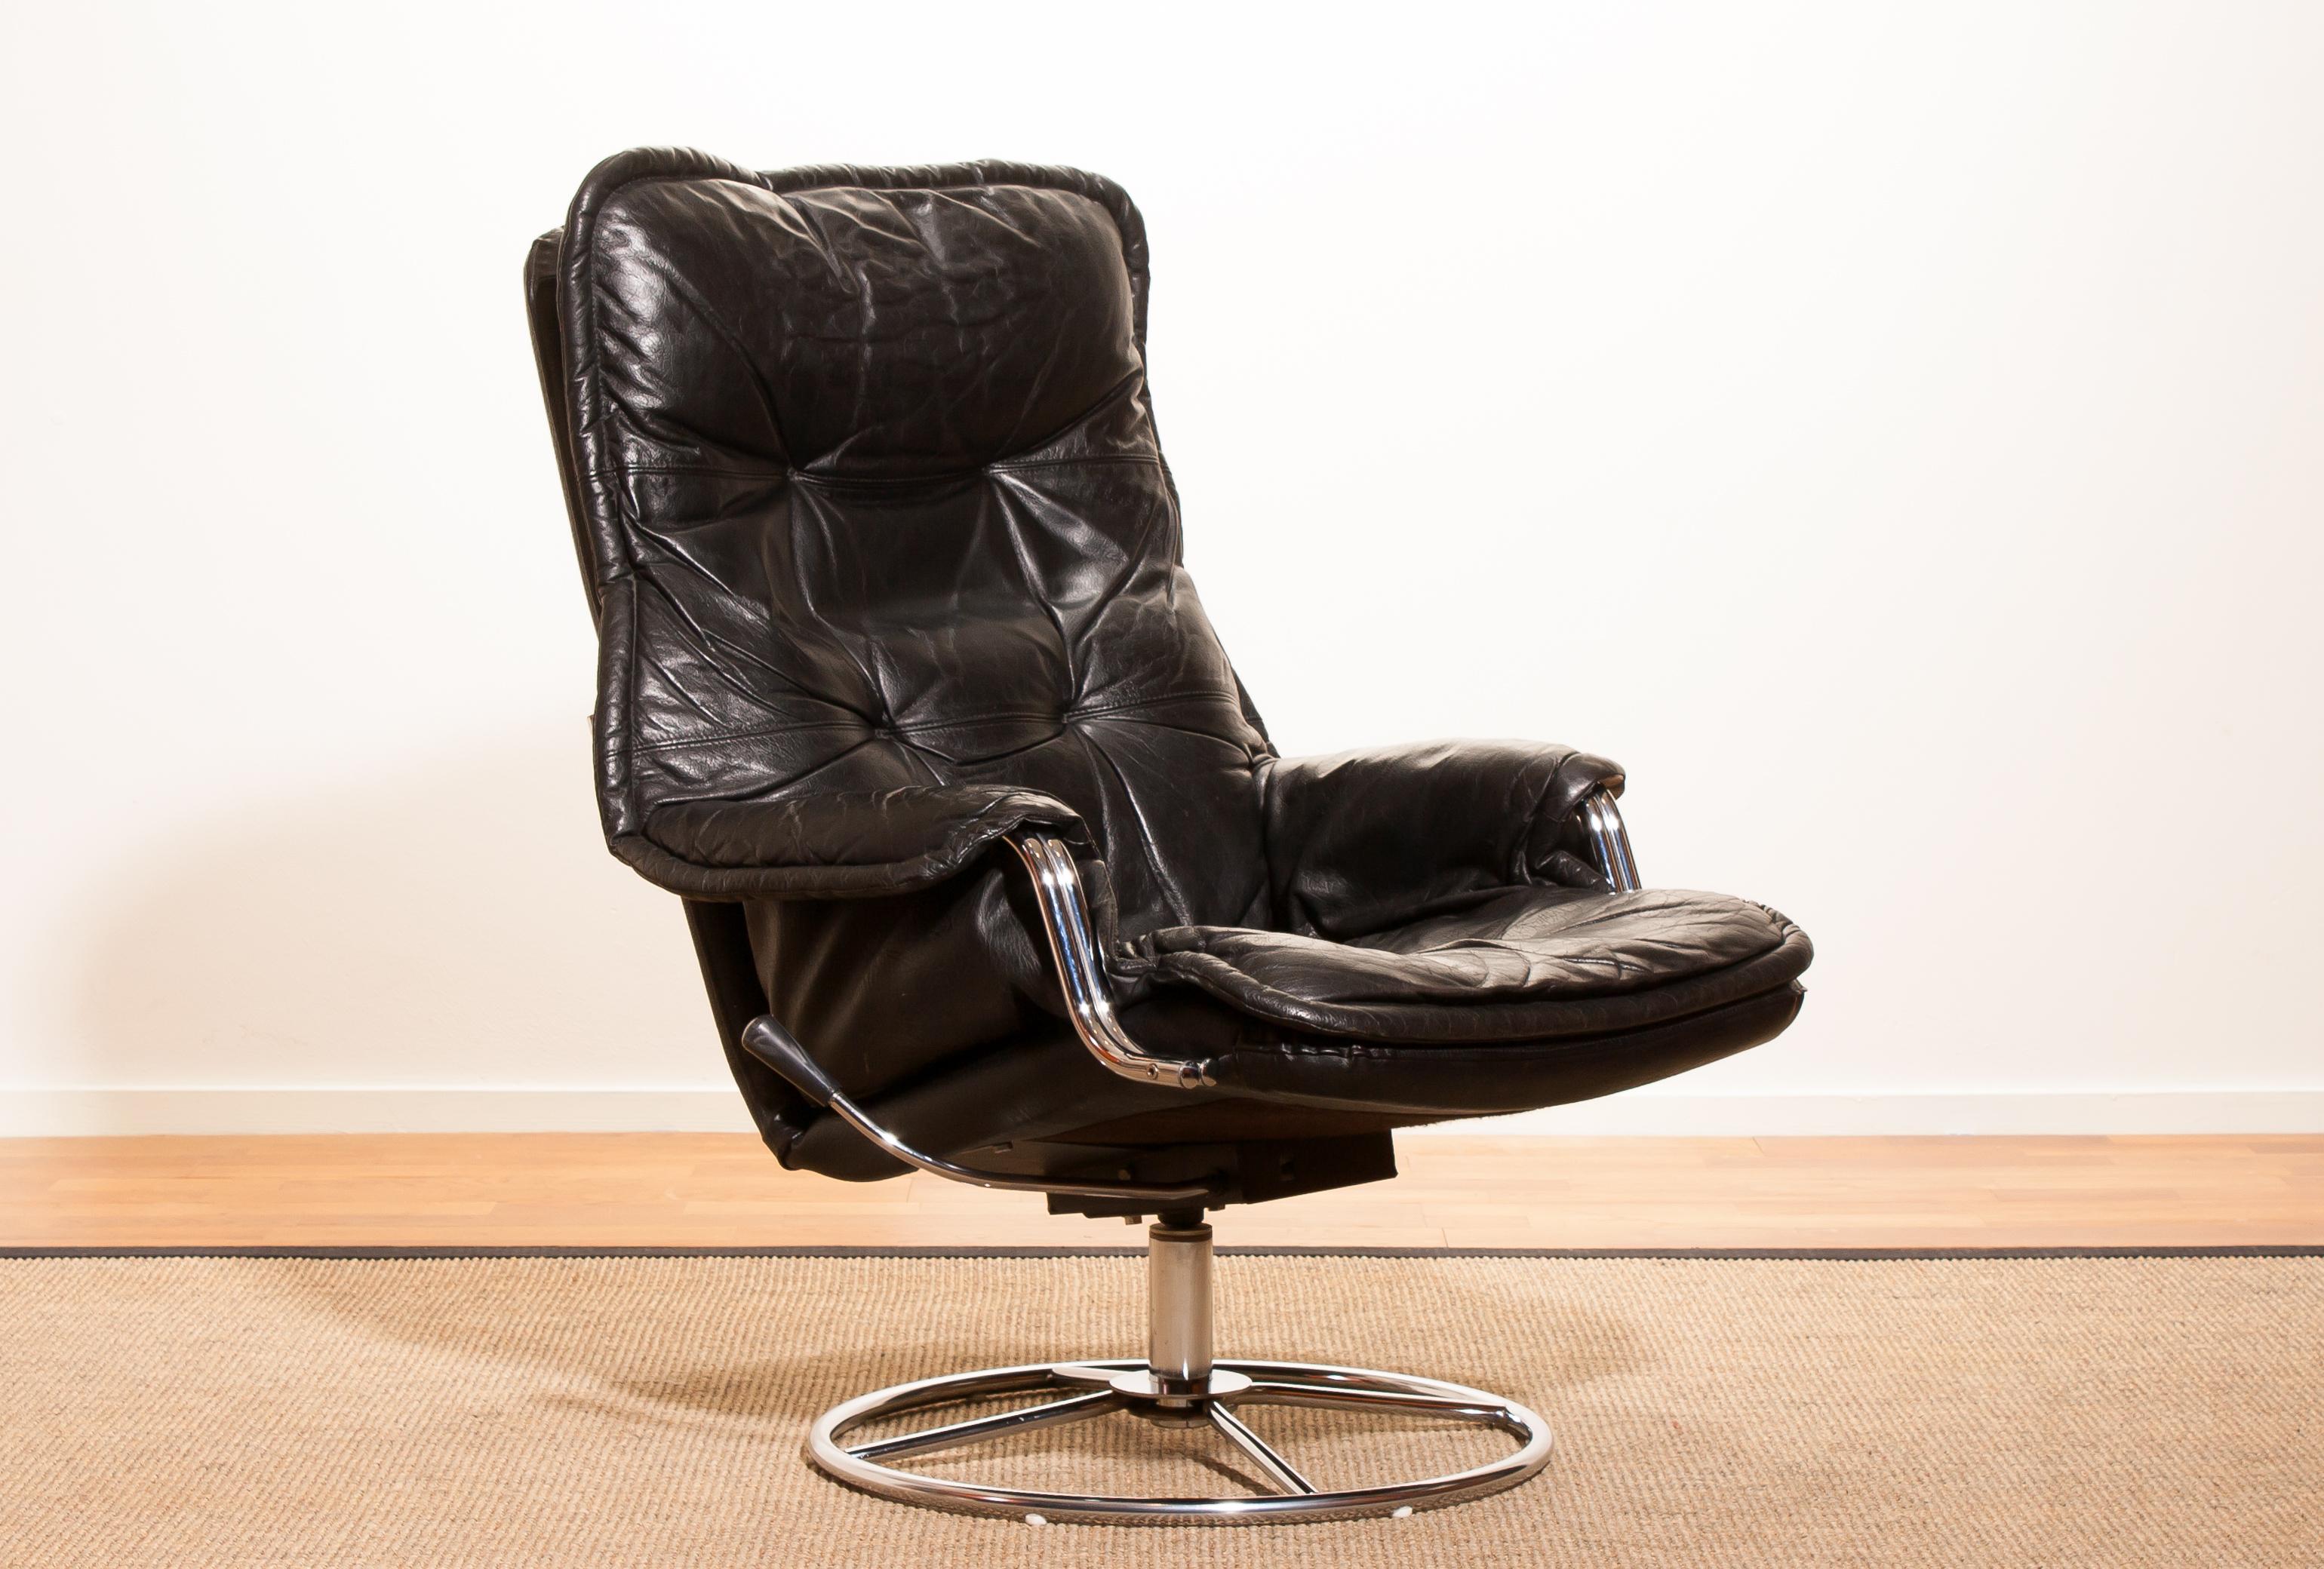 Beautiful swivel lounge chair by Lennart Bender.
This chair is made of a black leather seating on a chromed swivel rocking frame.
It is in a very nice condition.
Period 1960s
Dimensions: H 91 cm, W 74 cm, D 70 cm, SH 40 cm.